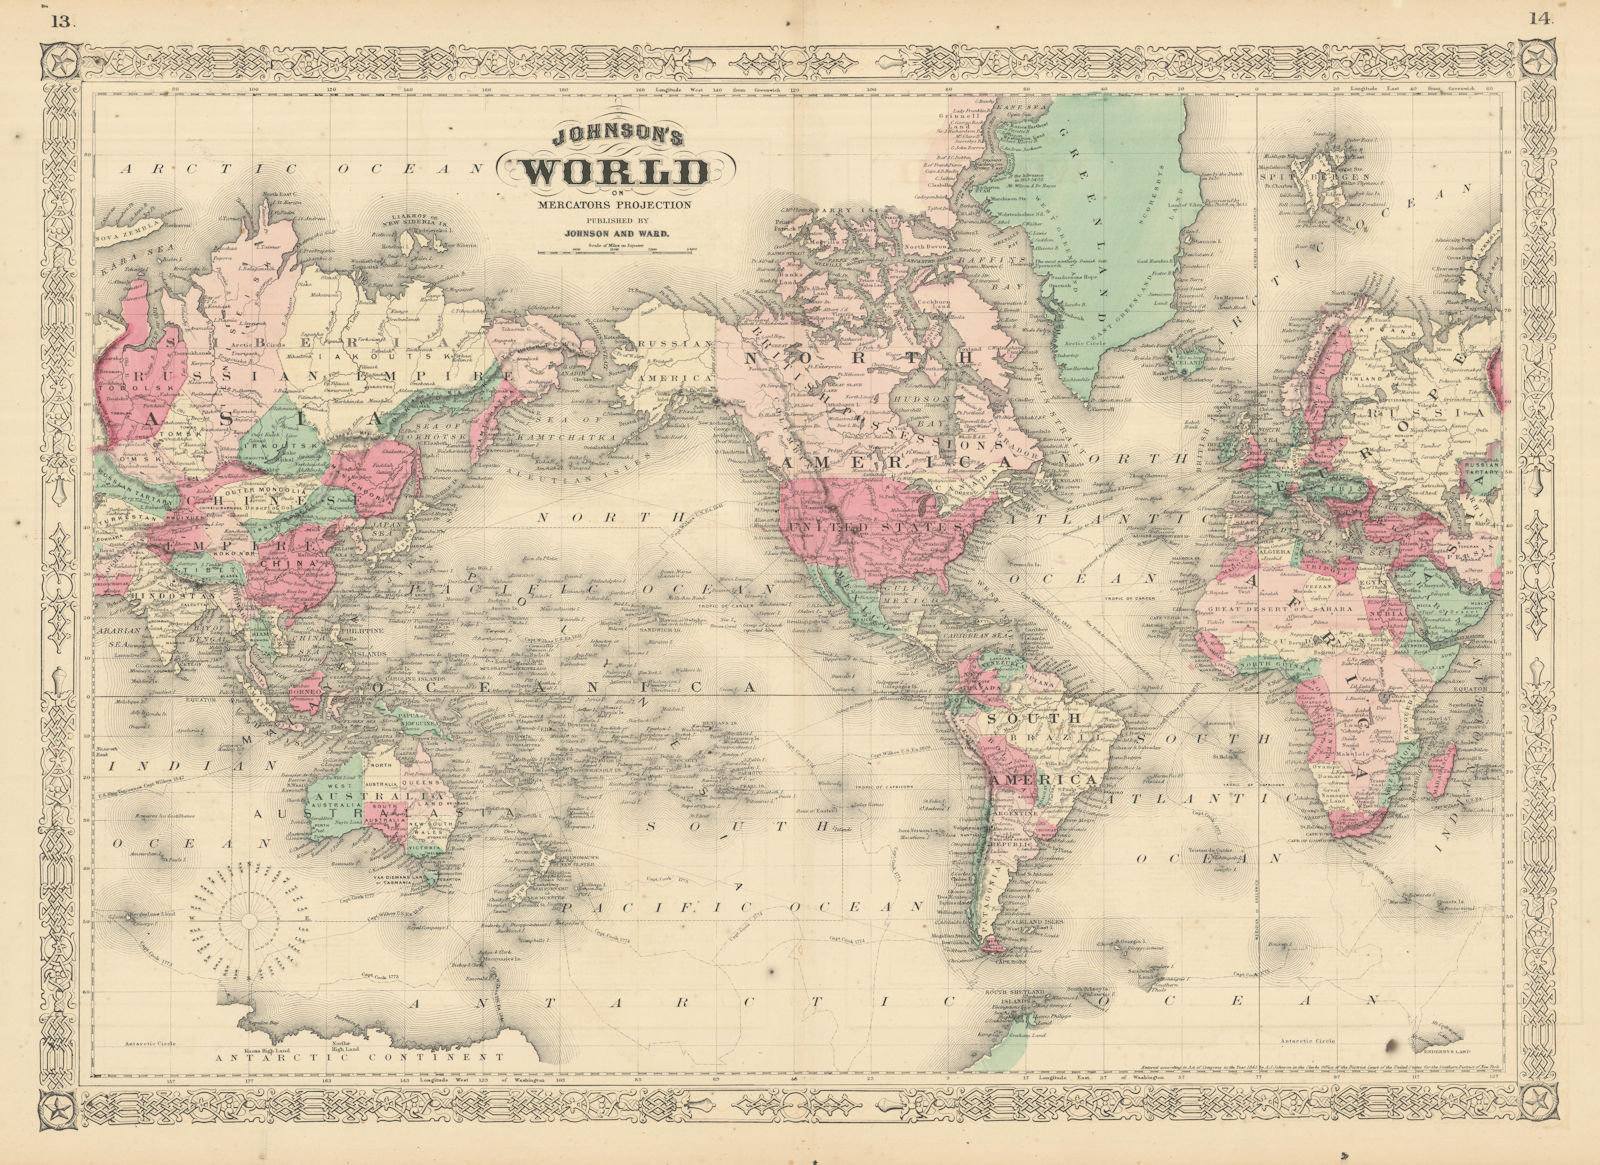 Johnson's World on Mercator's Projection. Americas-centric 1866 old map